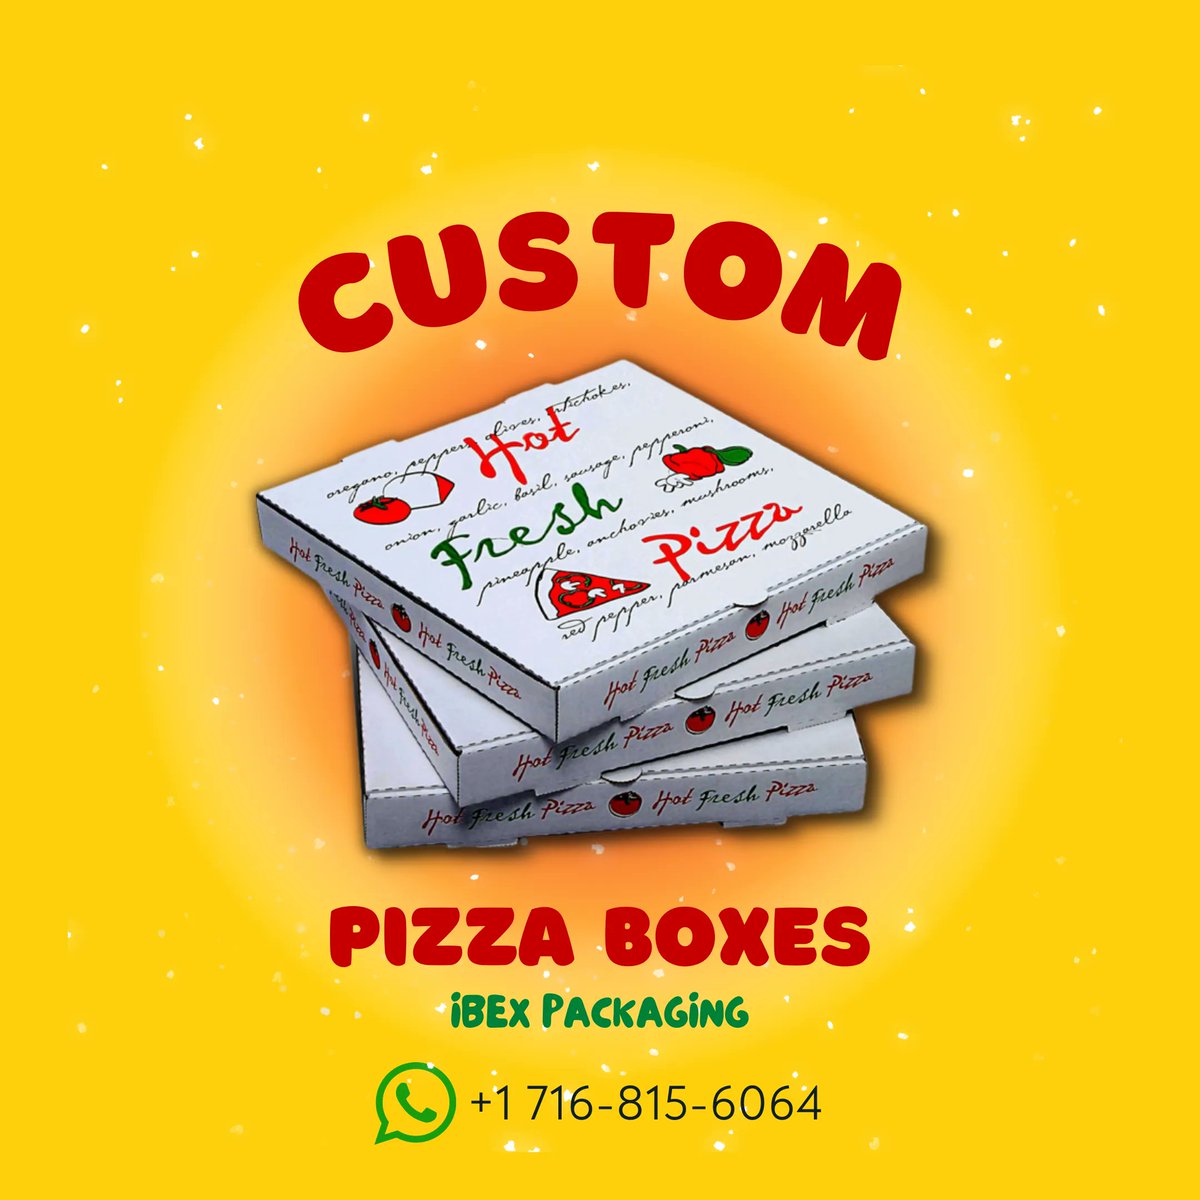 𝐏𝐈𝐙𝐙𝐀 𝐁𝐎𝐗𝐄𝐒 🍔
CALL NOW & GET FREE 100 BOXES ON AN ORDER OF 1000 BOXES 
WHATSAPP 👉 +1 716 815 6064 

#ibexpackaging #pizzapackagingboxes #pizzaboxes #pizzapackaging #pizzadeliveryboxes #deliveryboxes #takeawayboxes #disposableboxes #customboxes #packaging #boxes